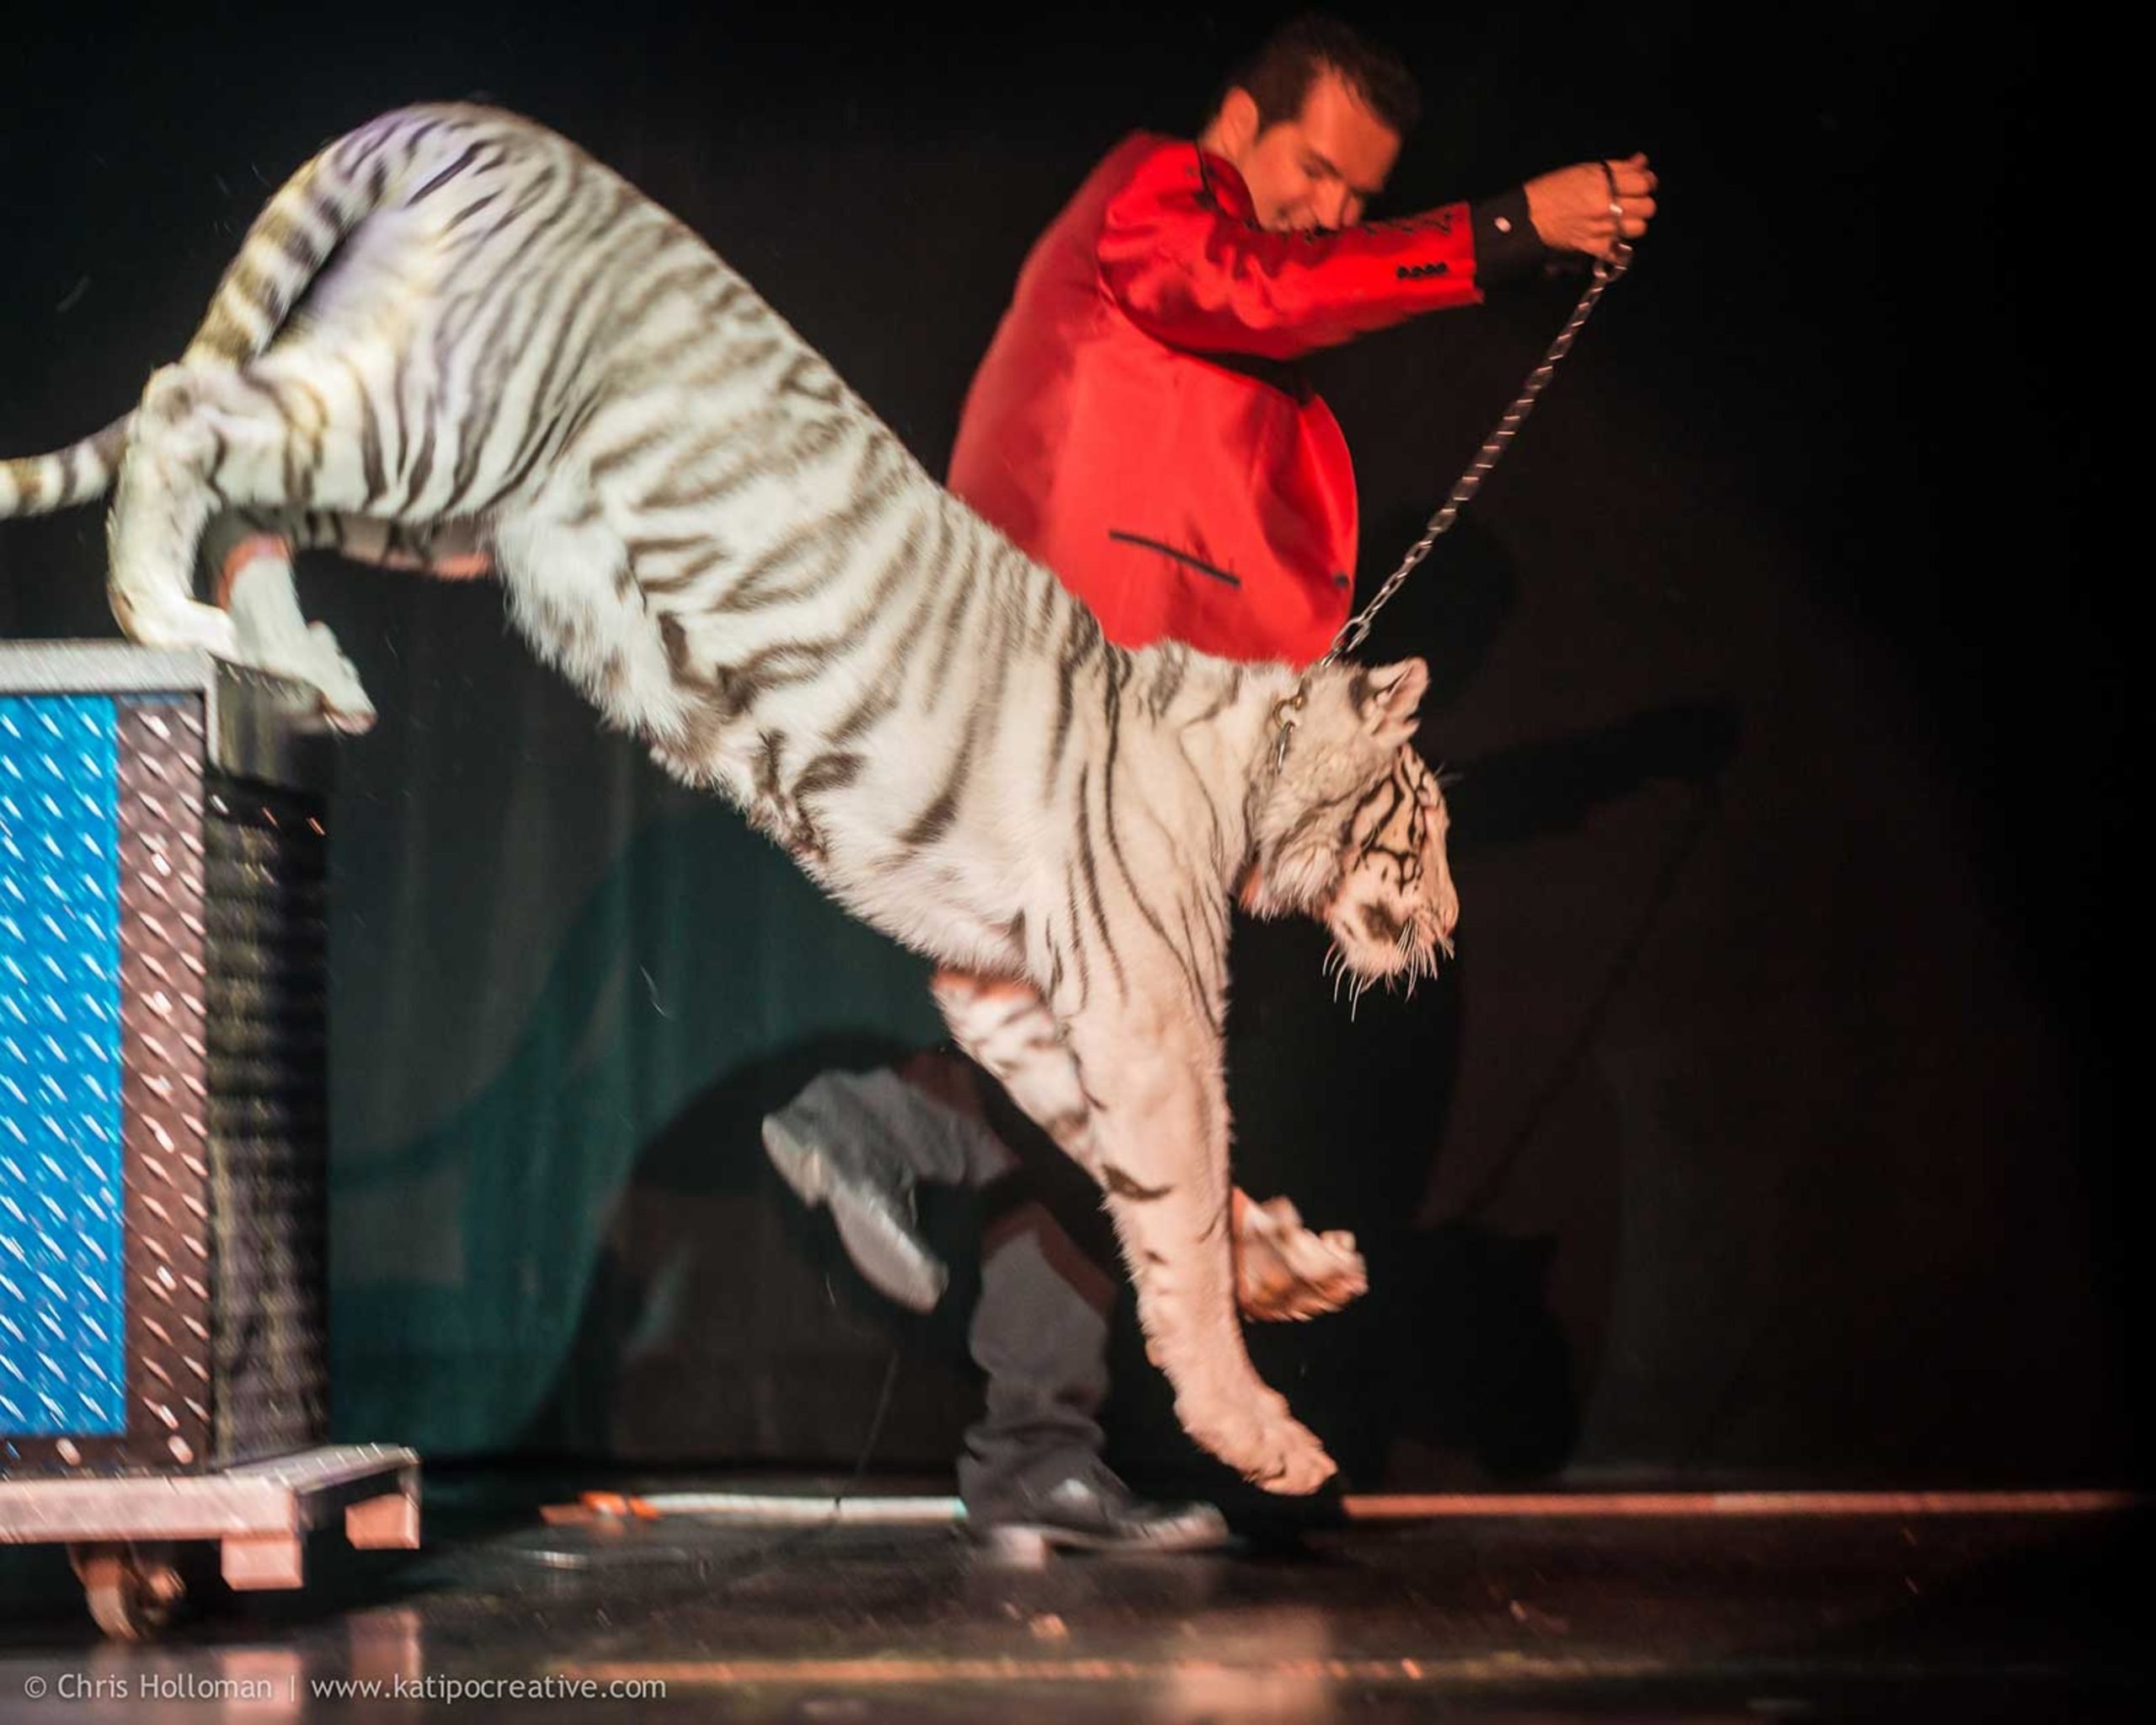 Magician Dirk Arthur performs with a snow leopard in this undated photo from his website. (Image: dirkarthurmagic.com)